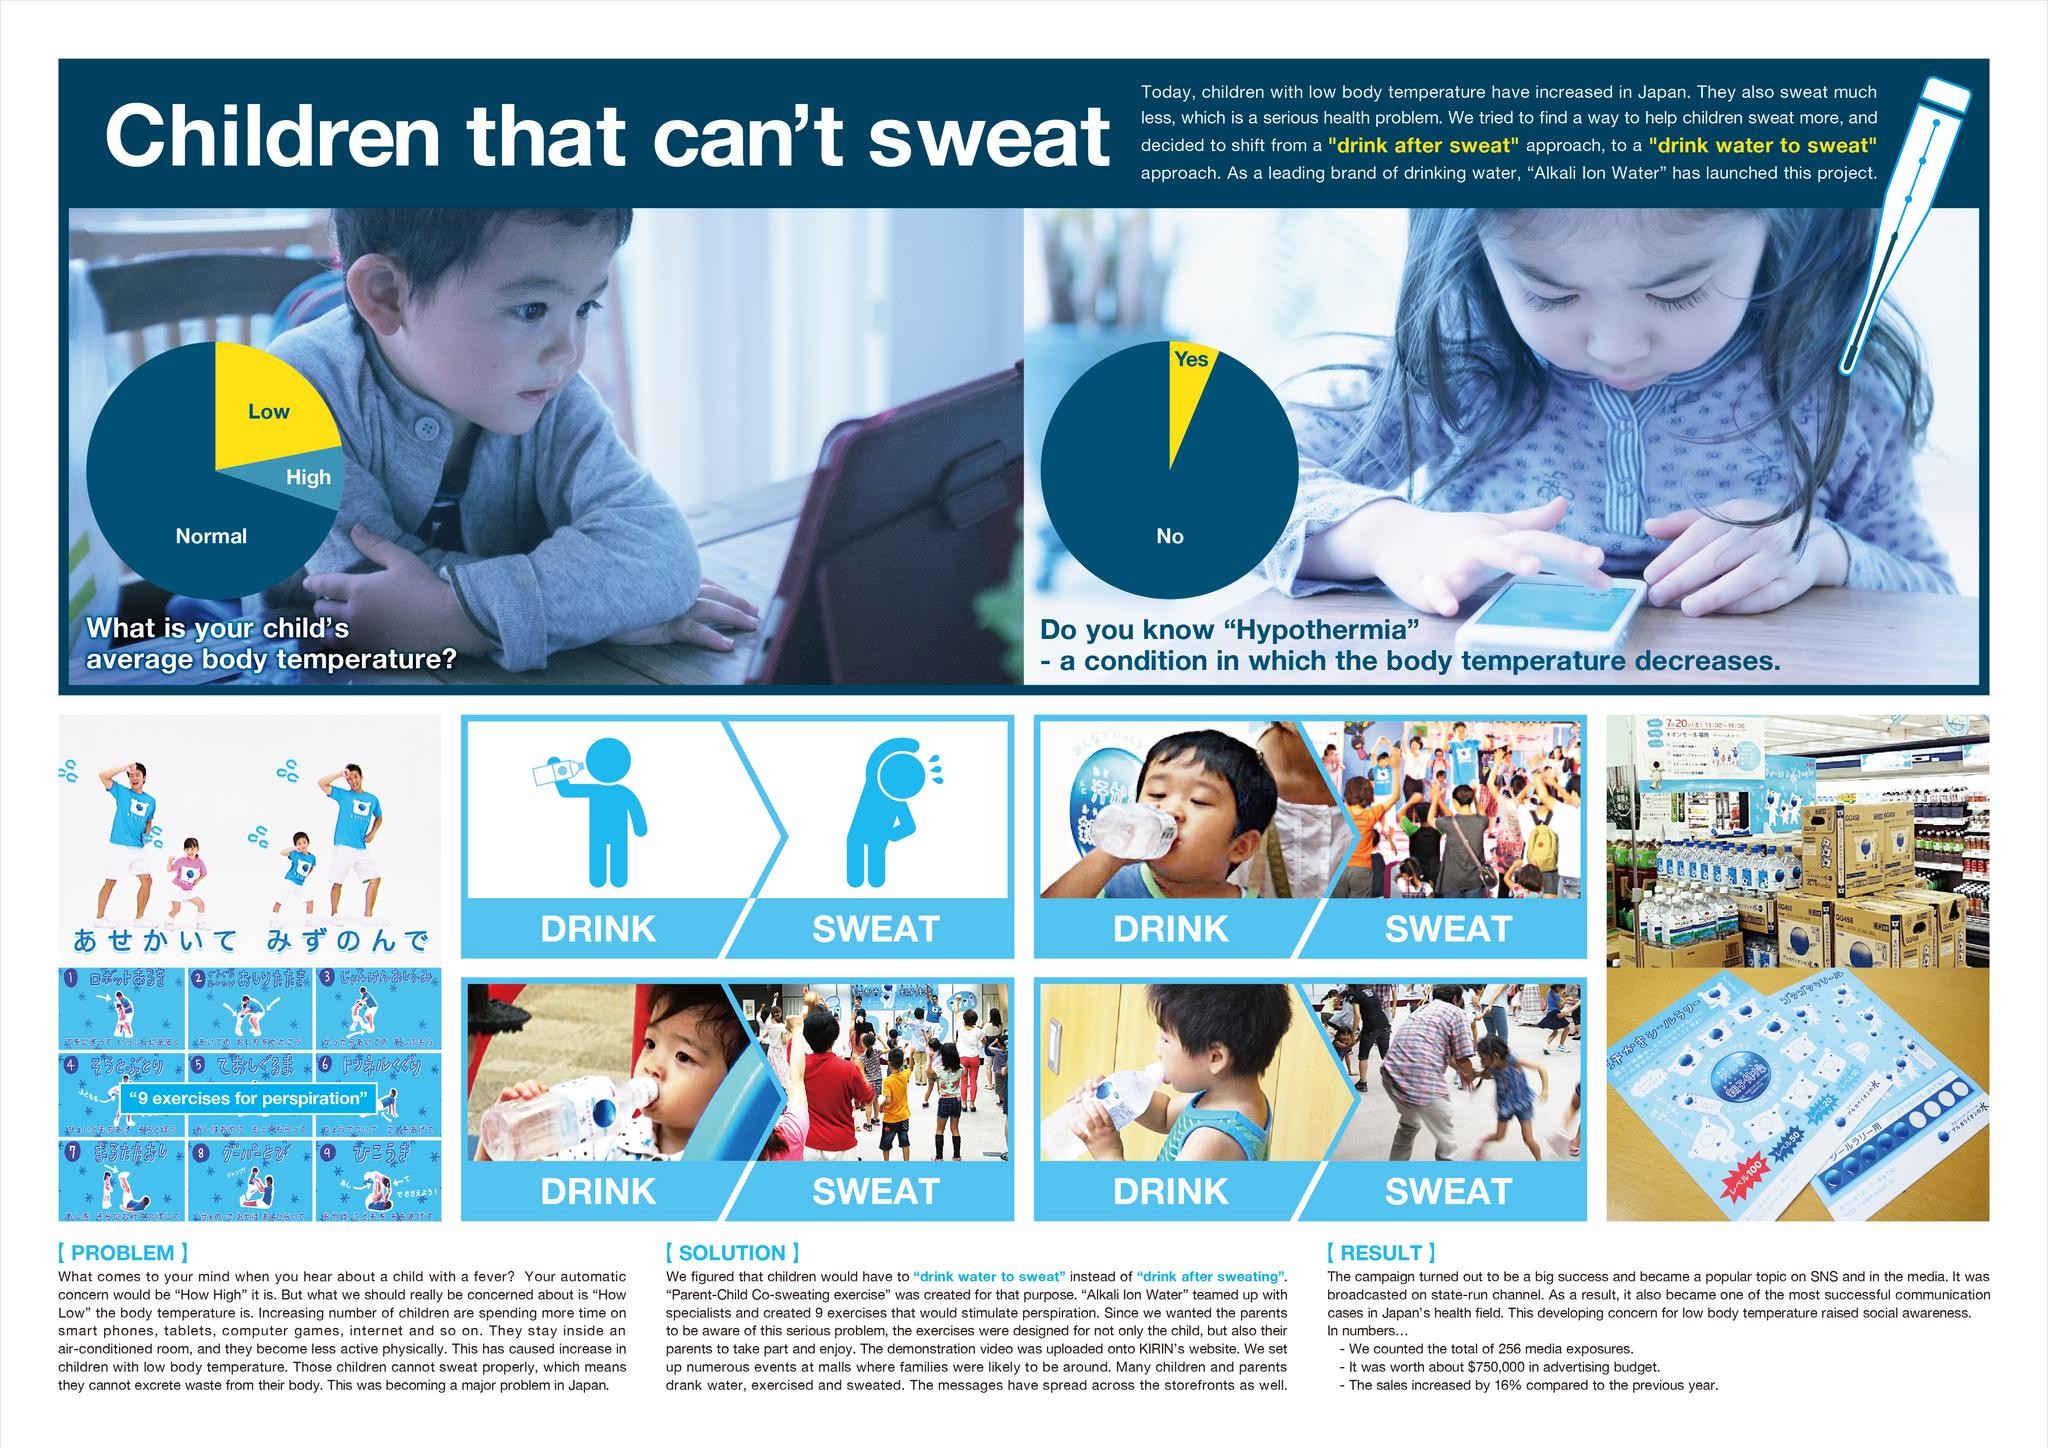 CHILDREN THAT CAN’T SWEAT